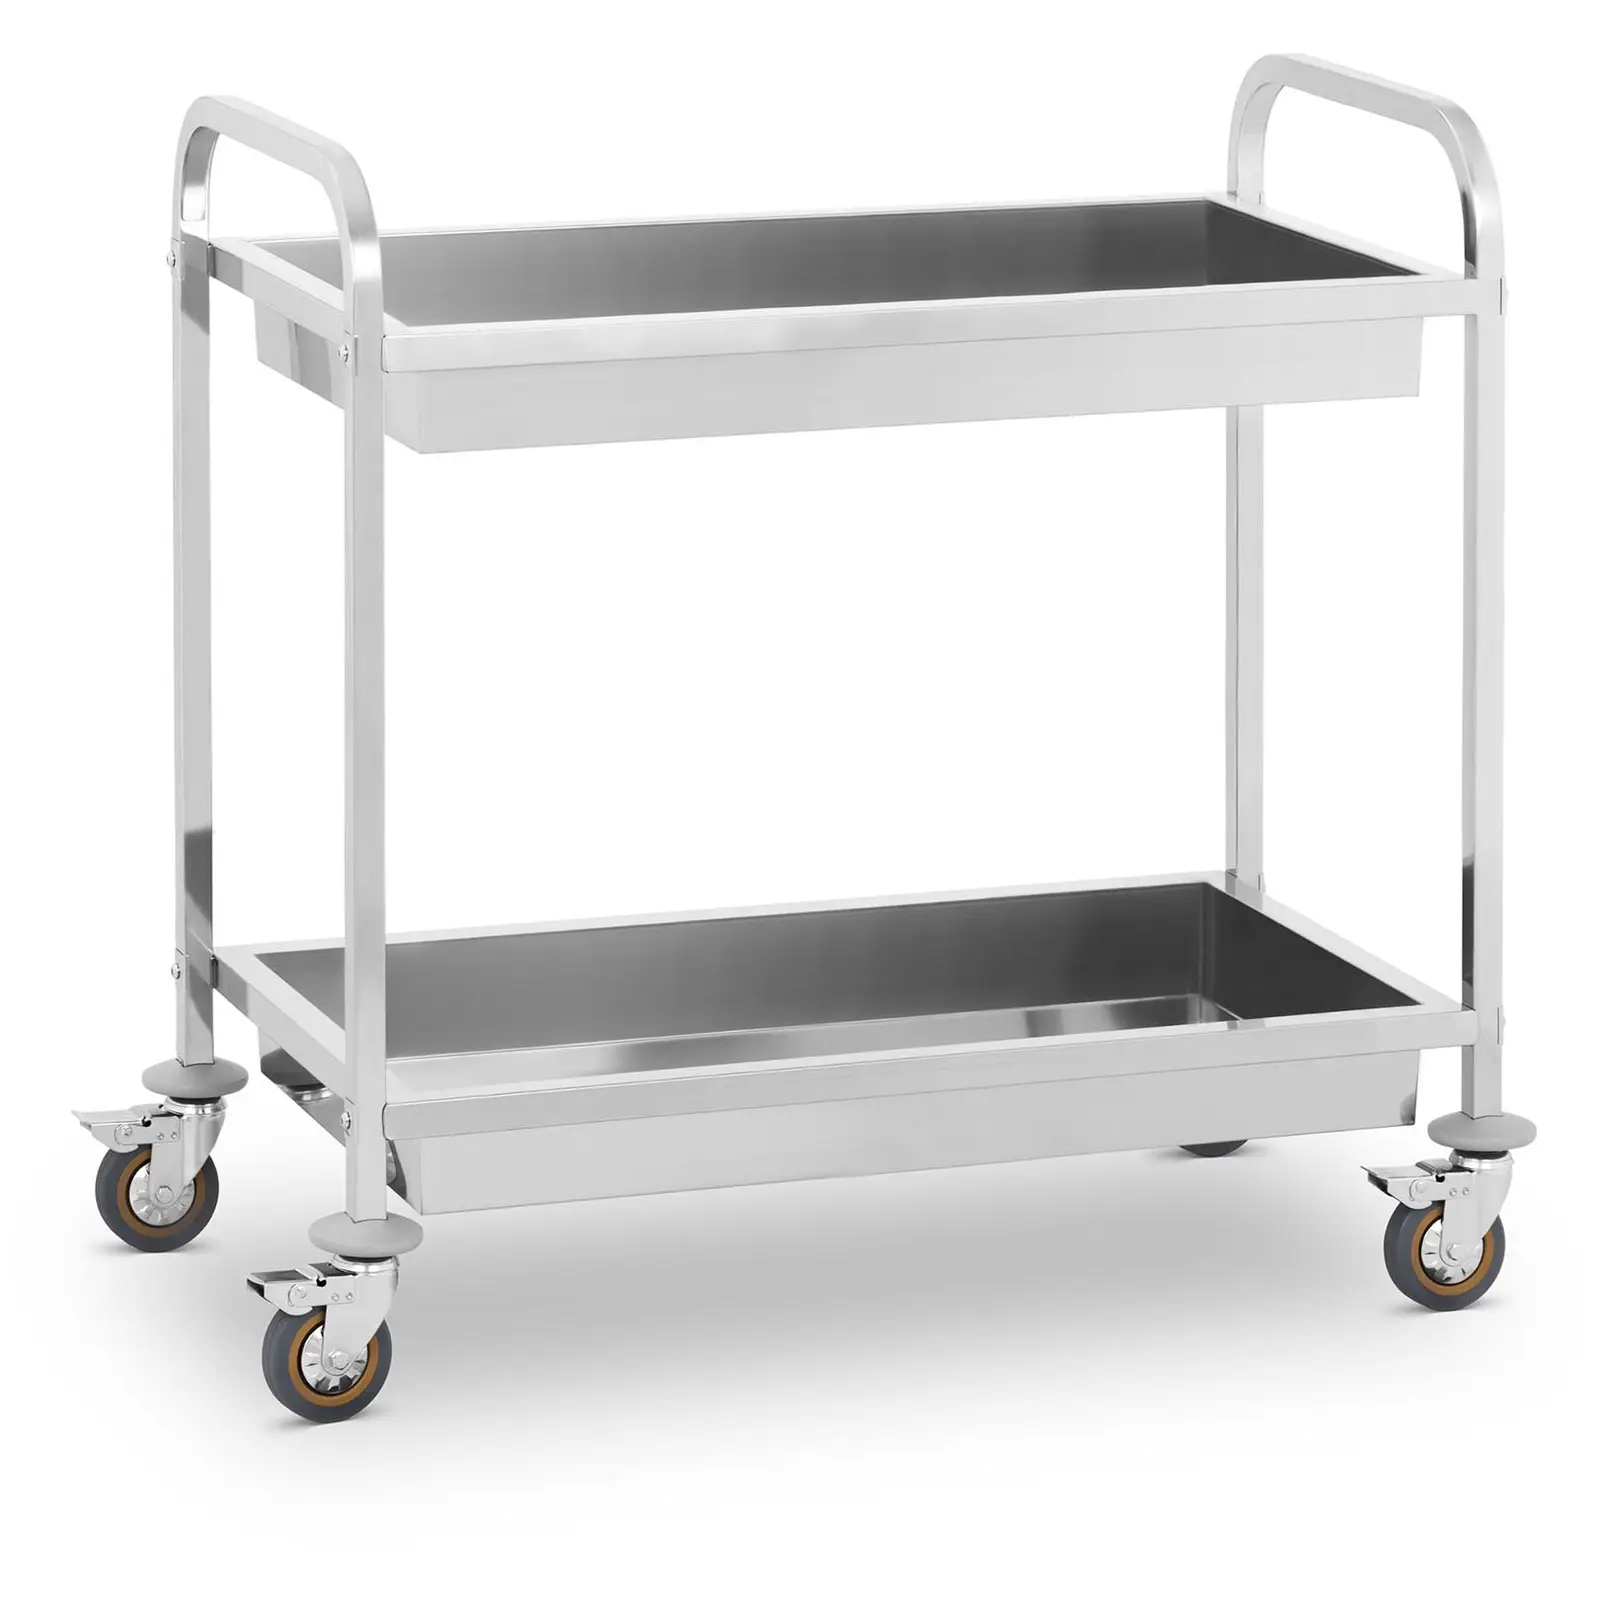 Serving Trolley - 2 Container Trays - up to 320 kg